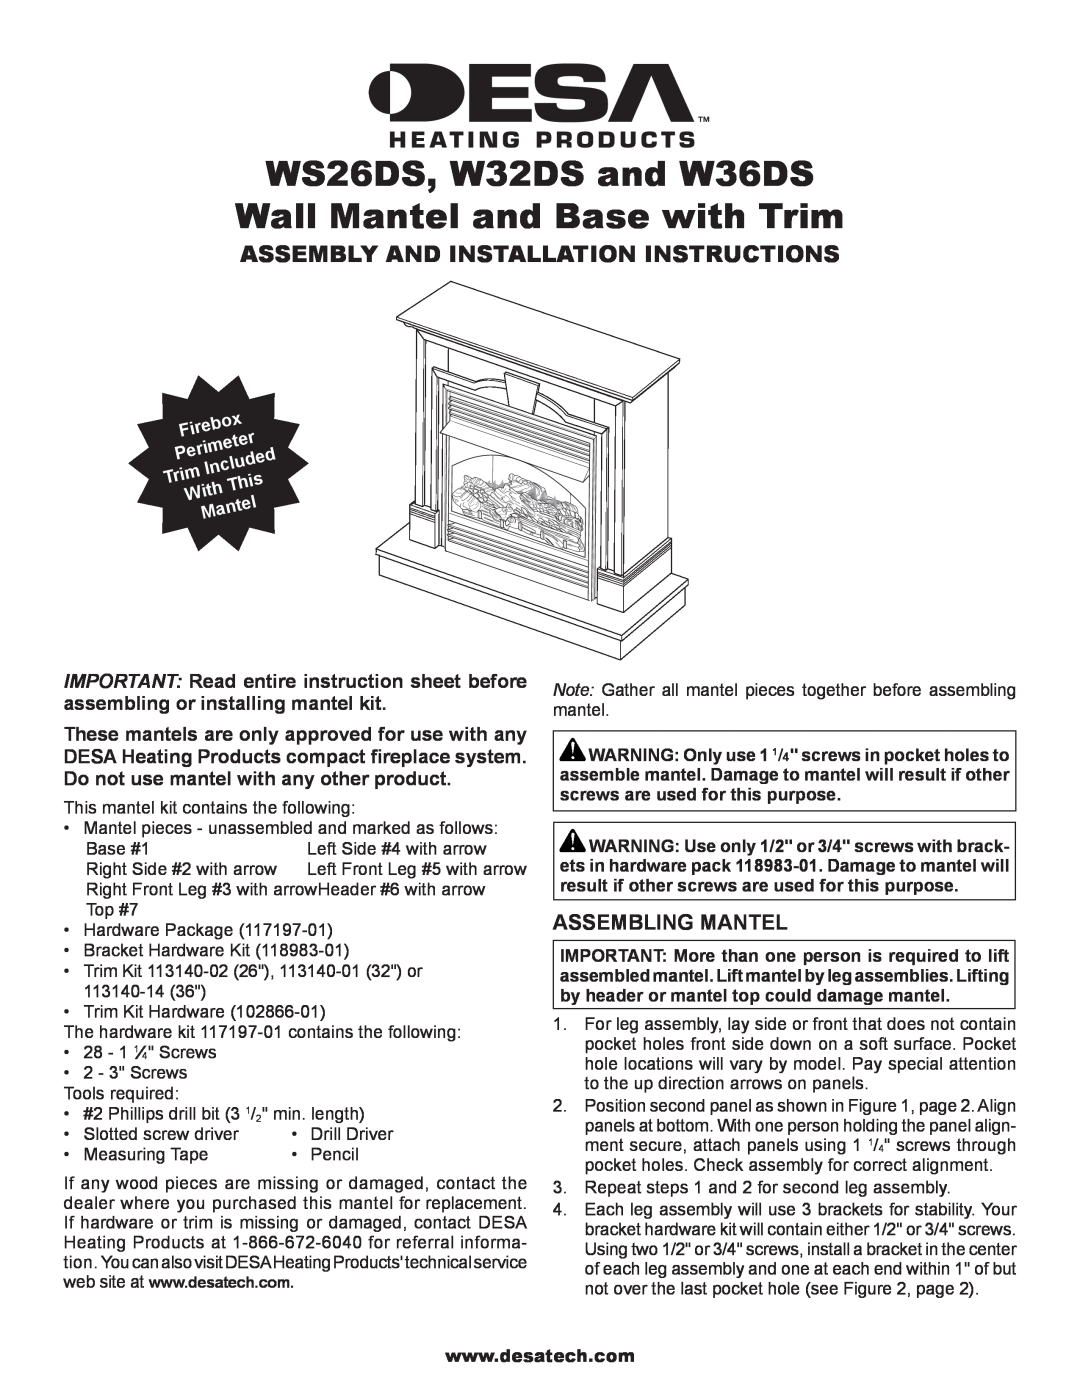 FMI W36DS, W32DS, WS26DS installation instructions Assembling Mantel, Assembly And Installation Instructions 